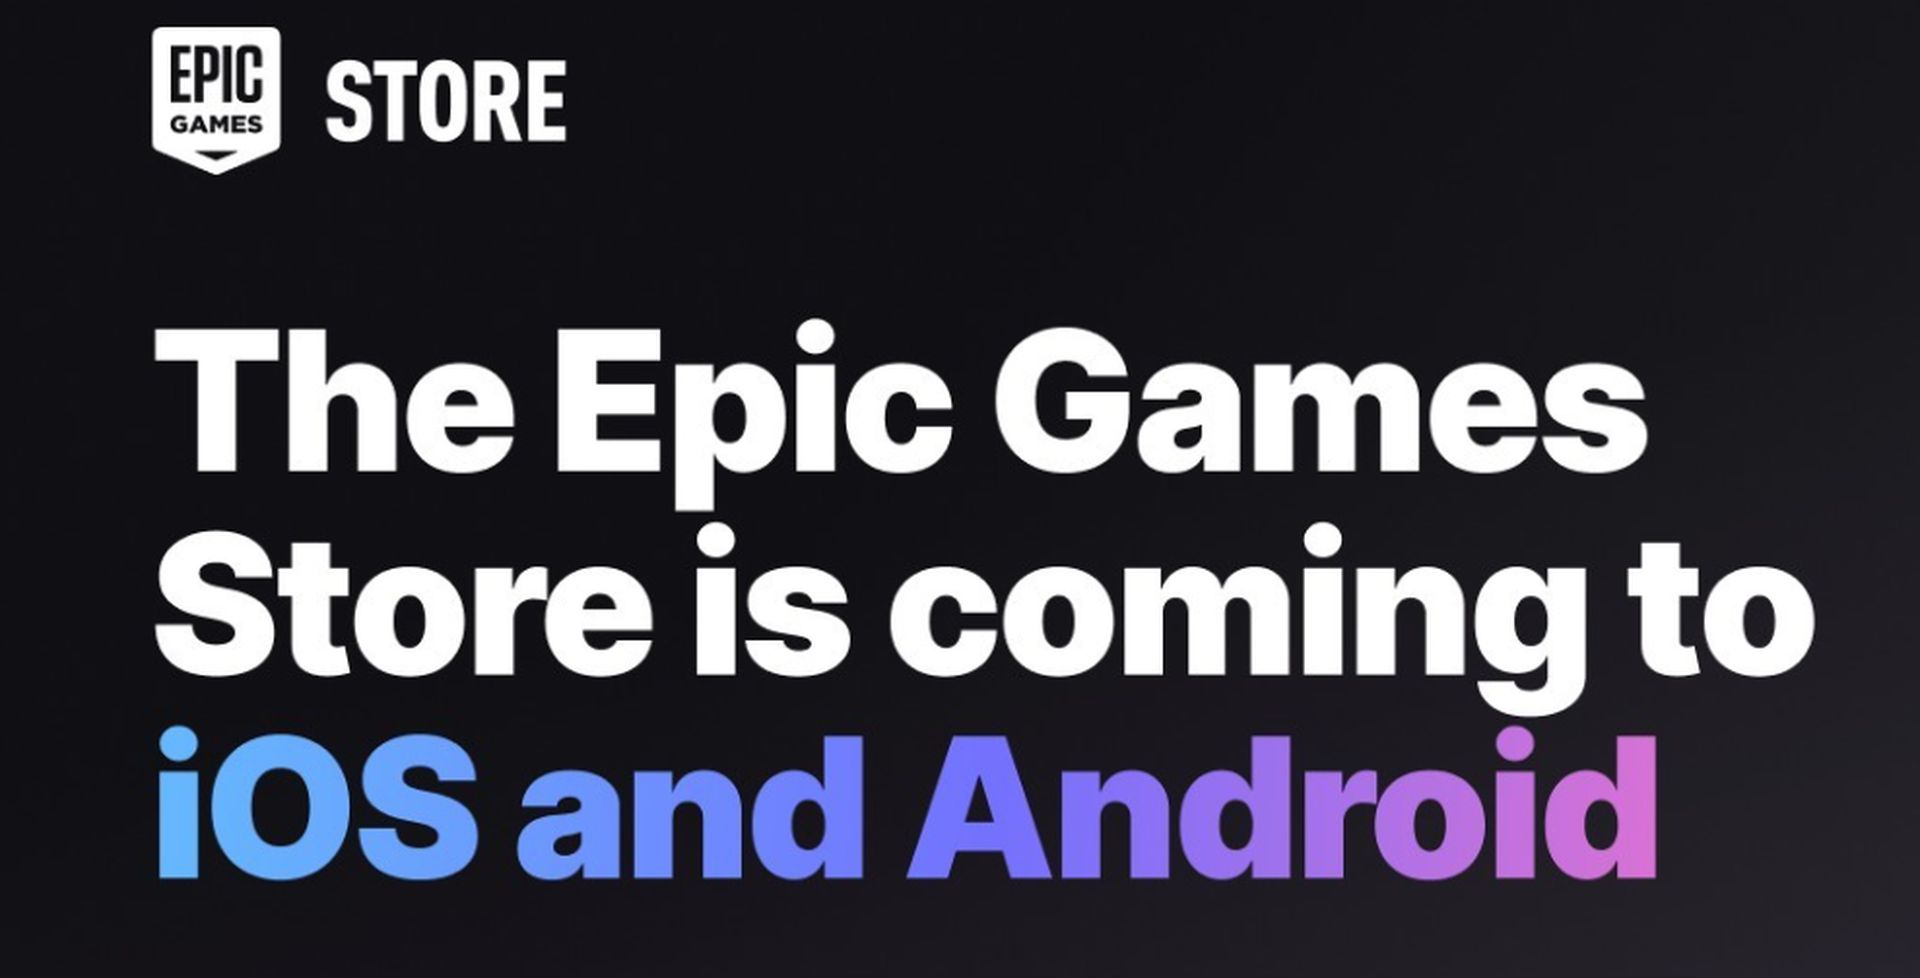 Epic Games Store is coming to iOS and Android